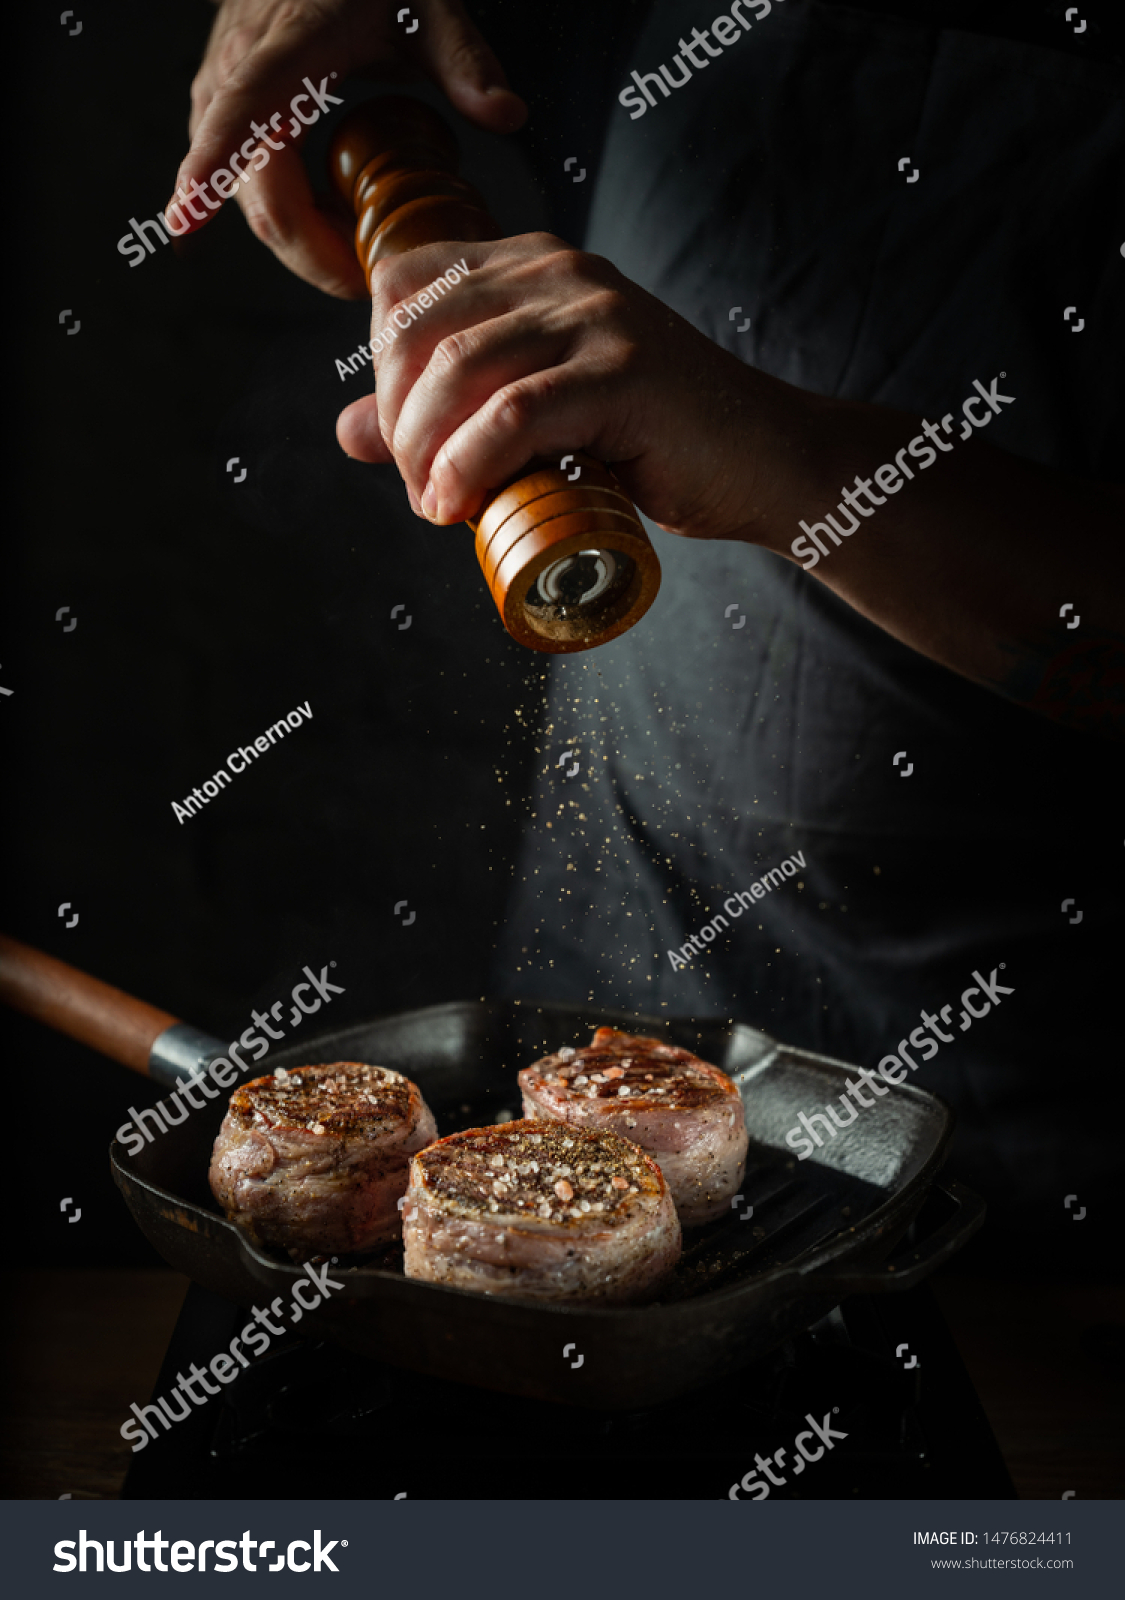 Close up chef hands adding pepper in mill during cooking beef steak on grill pan black background for copy space text restaurant menu, #1476824411